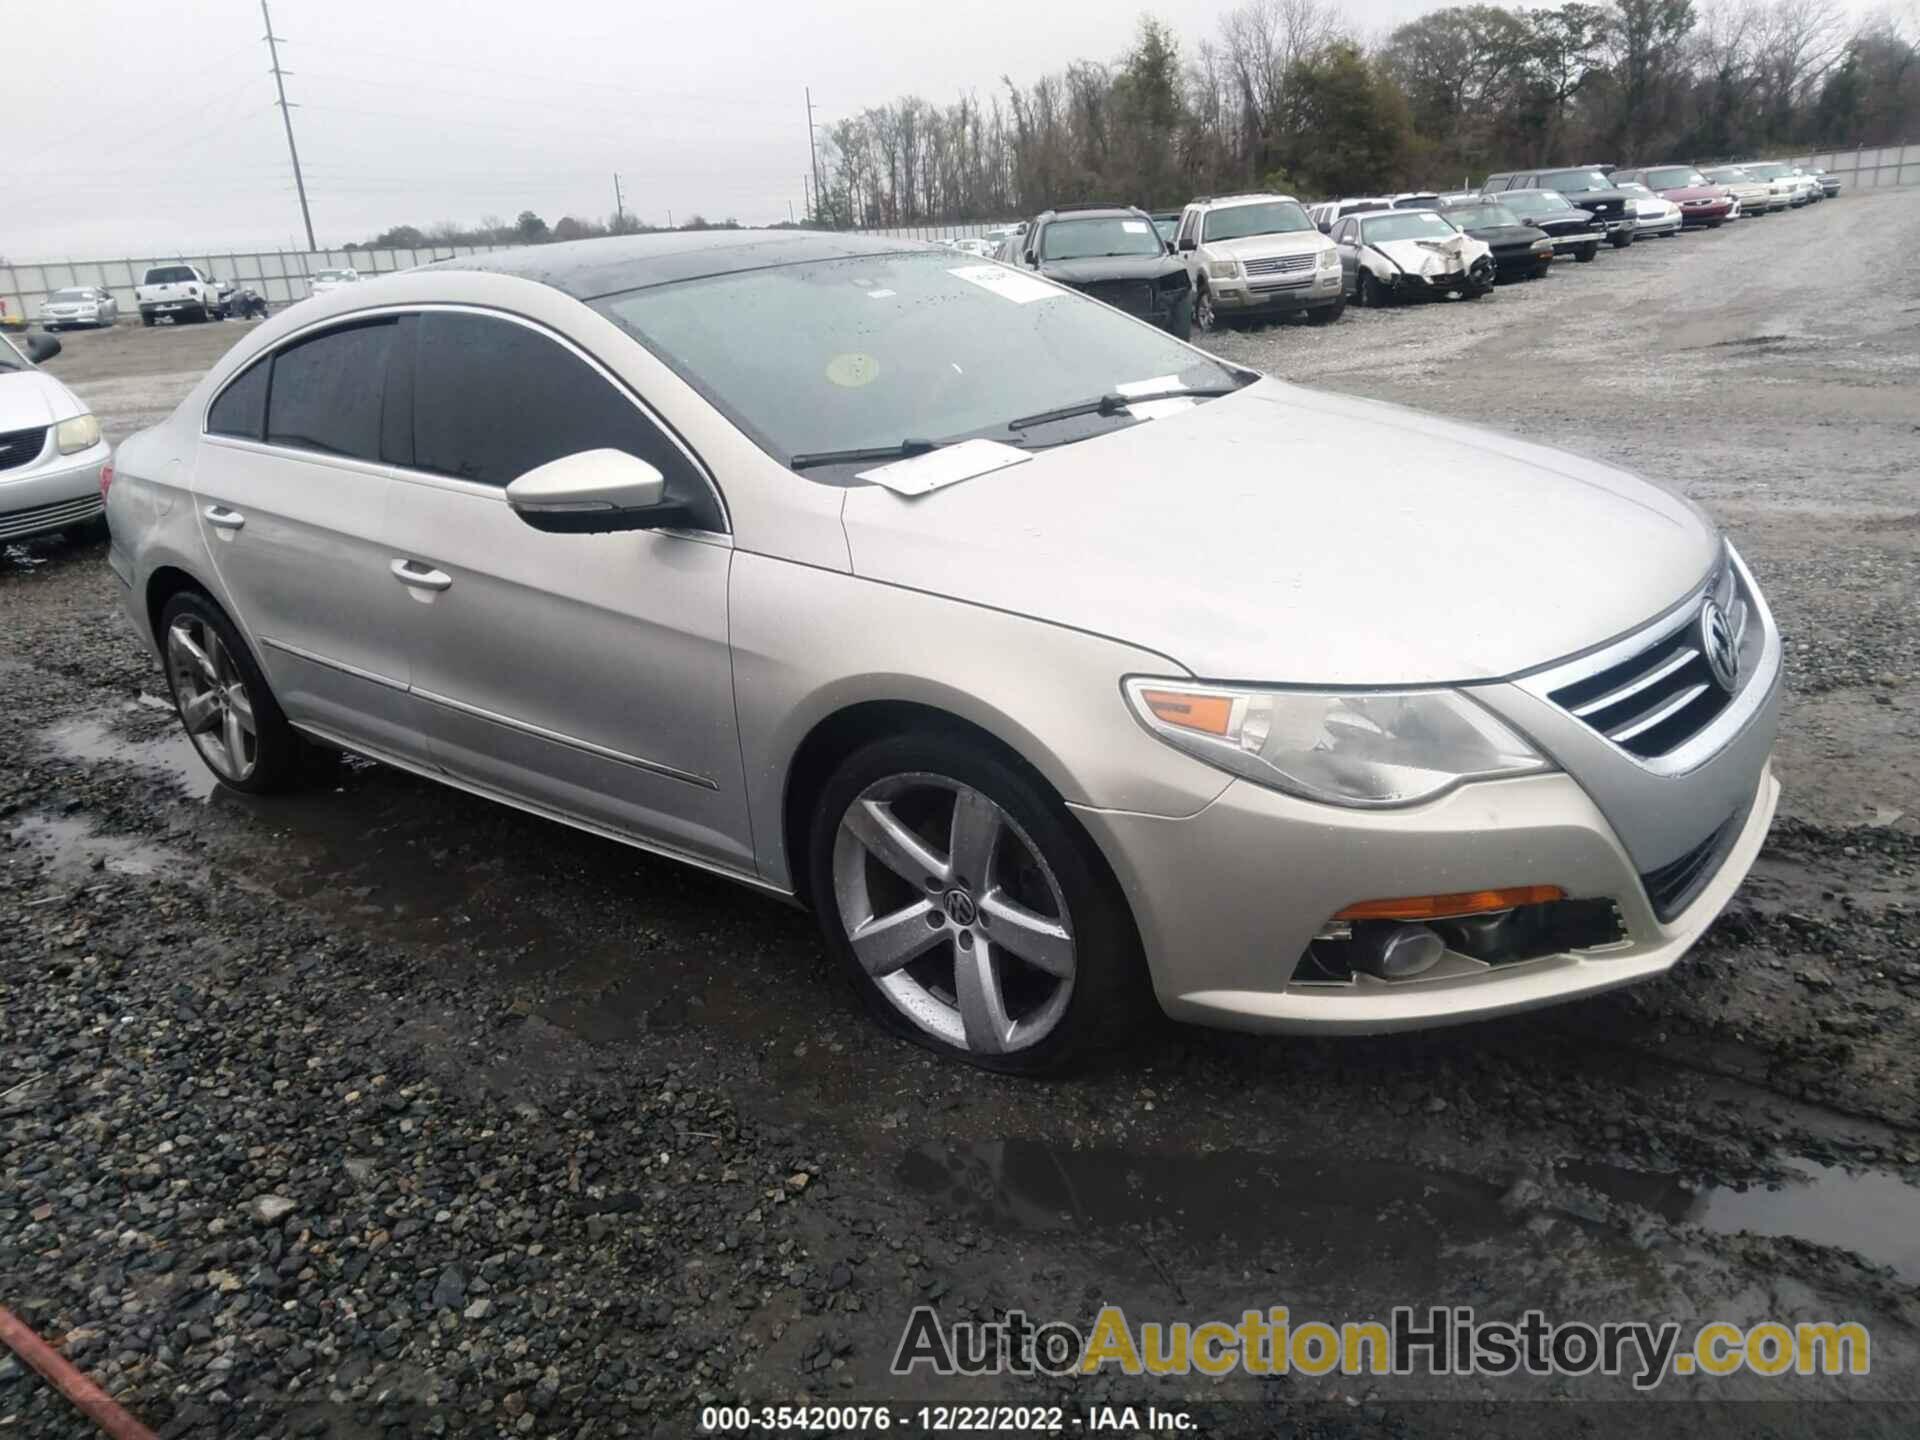 VOLKSWAGEN CC LUX PLUS, WVWHP7AN1BE729616